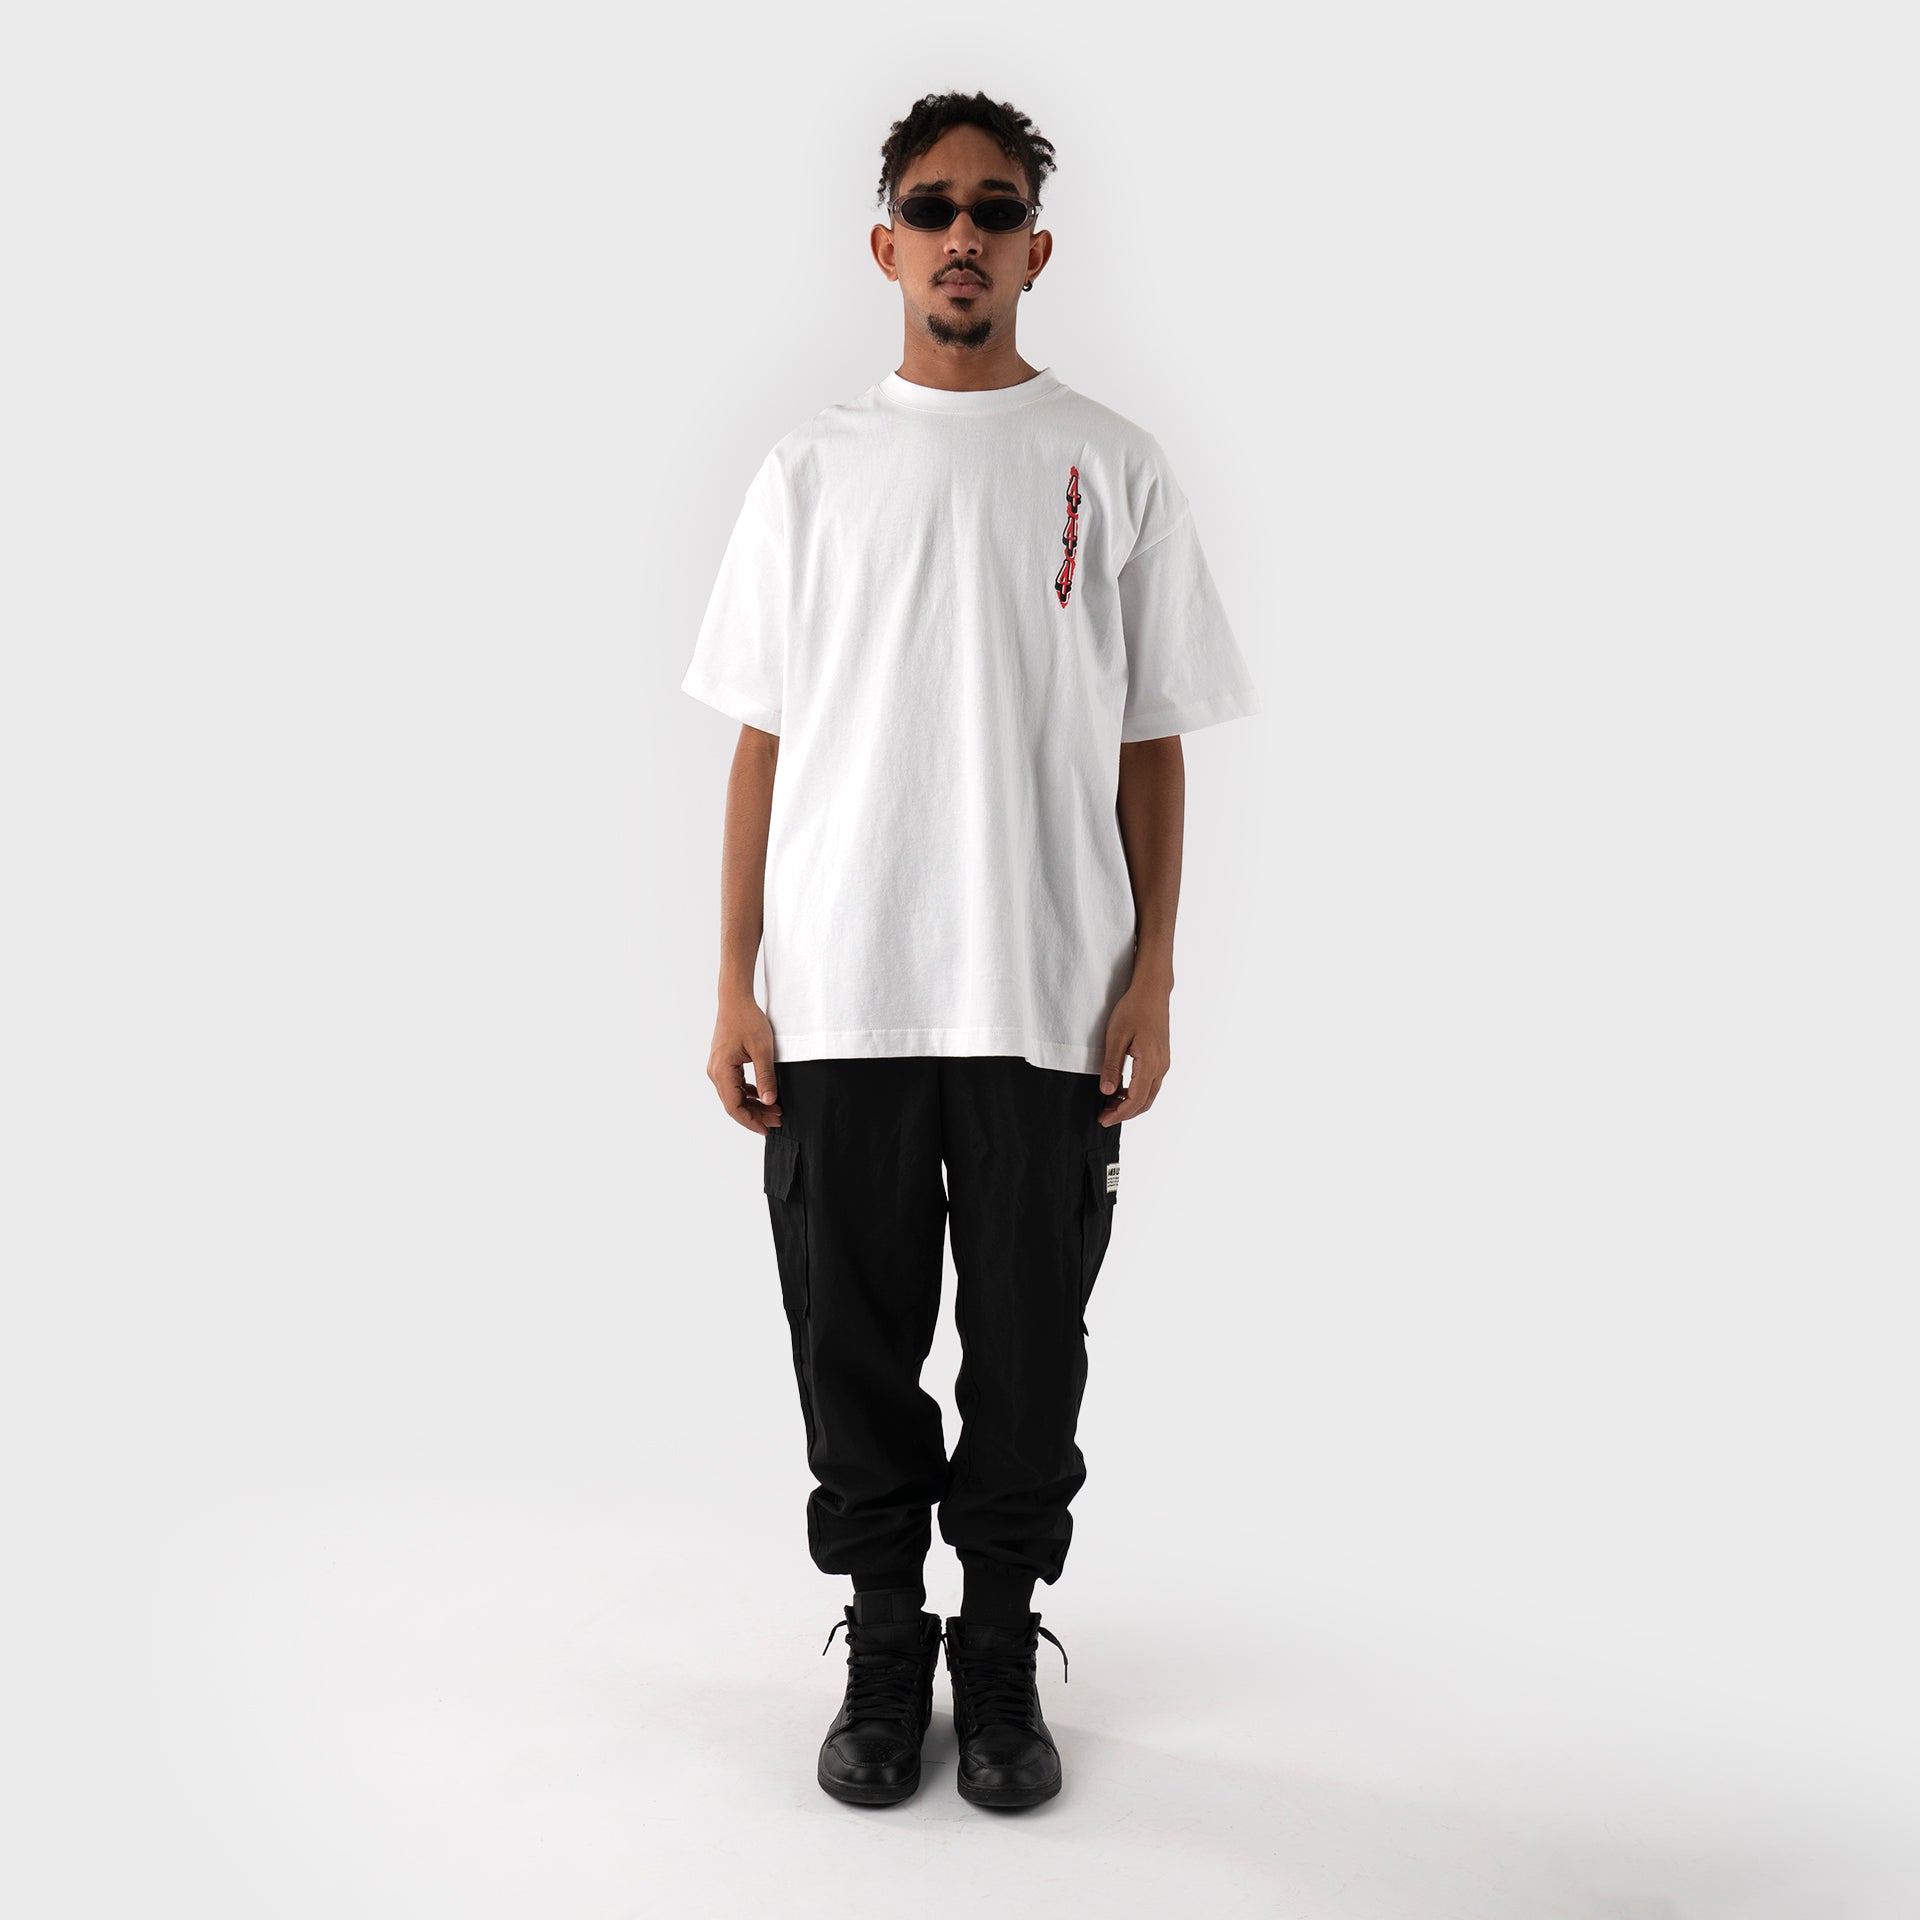 White "No Inspiration" T-shirt From Triple Four